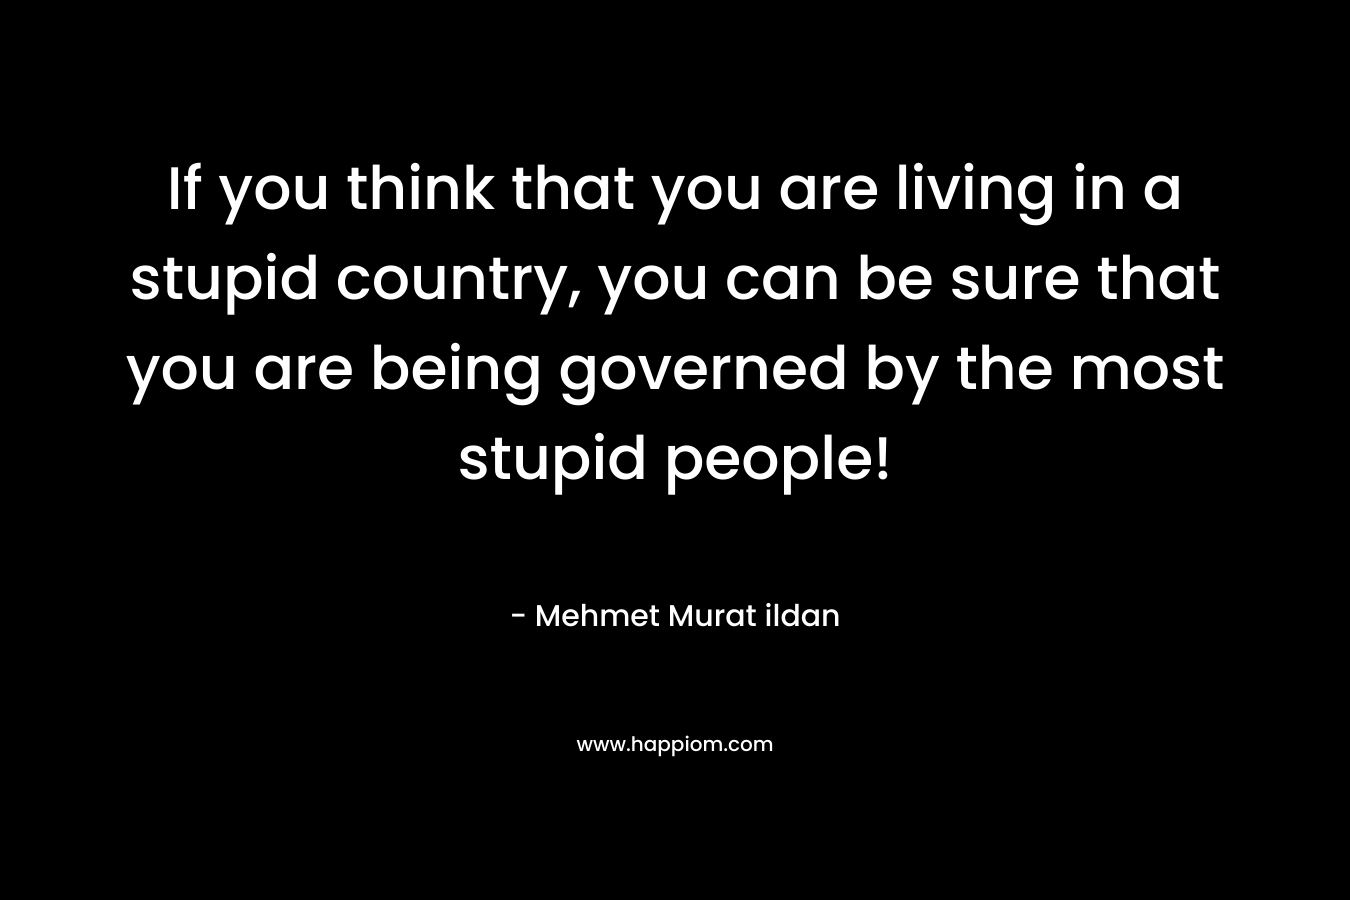 If you think that you are living in a stupid country, you can be sure that you are being governed by the most stupid people! – Mehmet Murat ildan